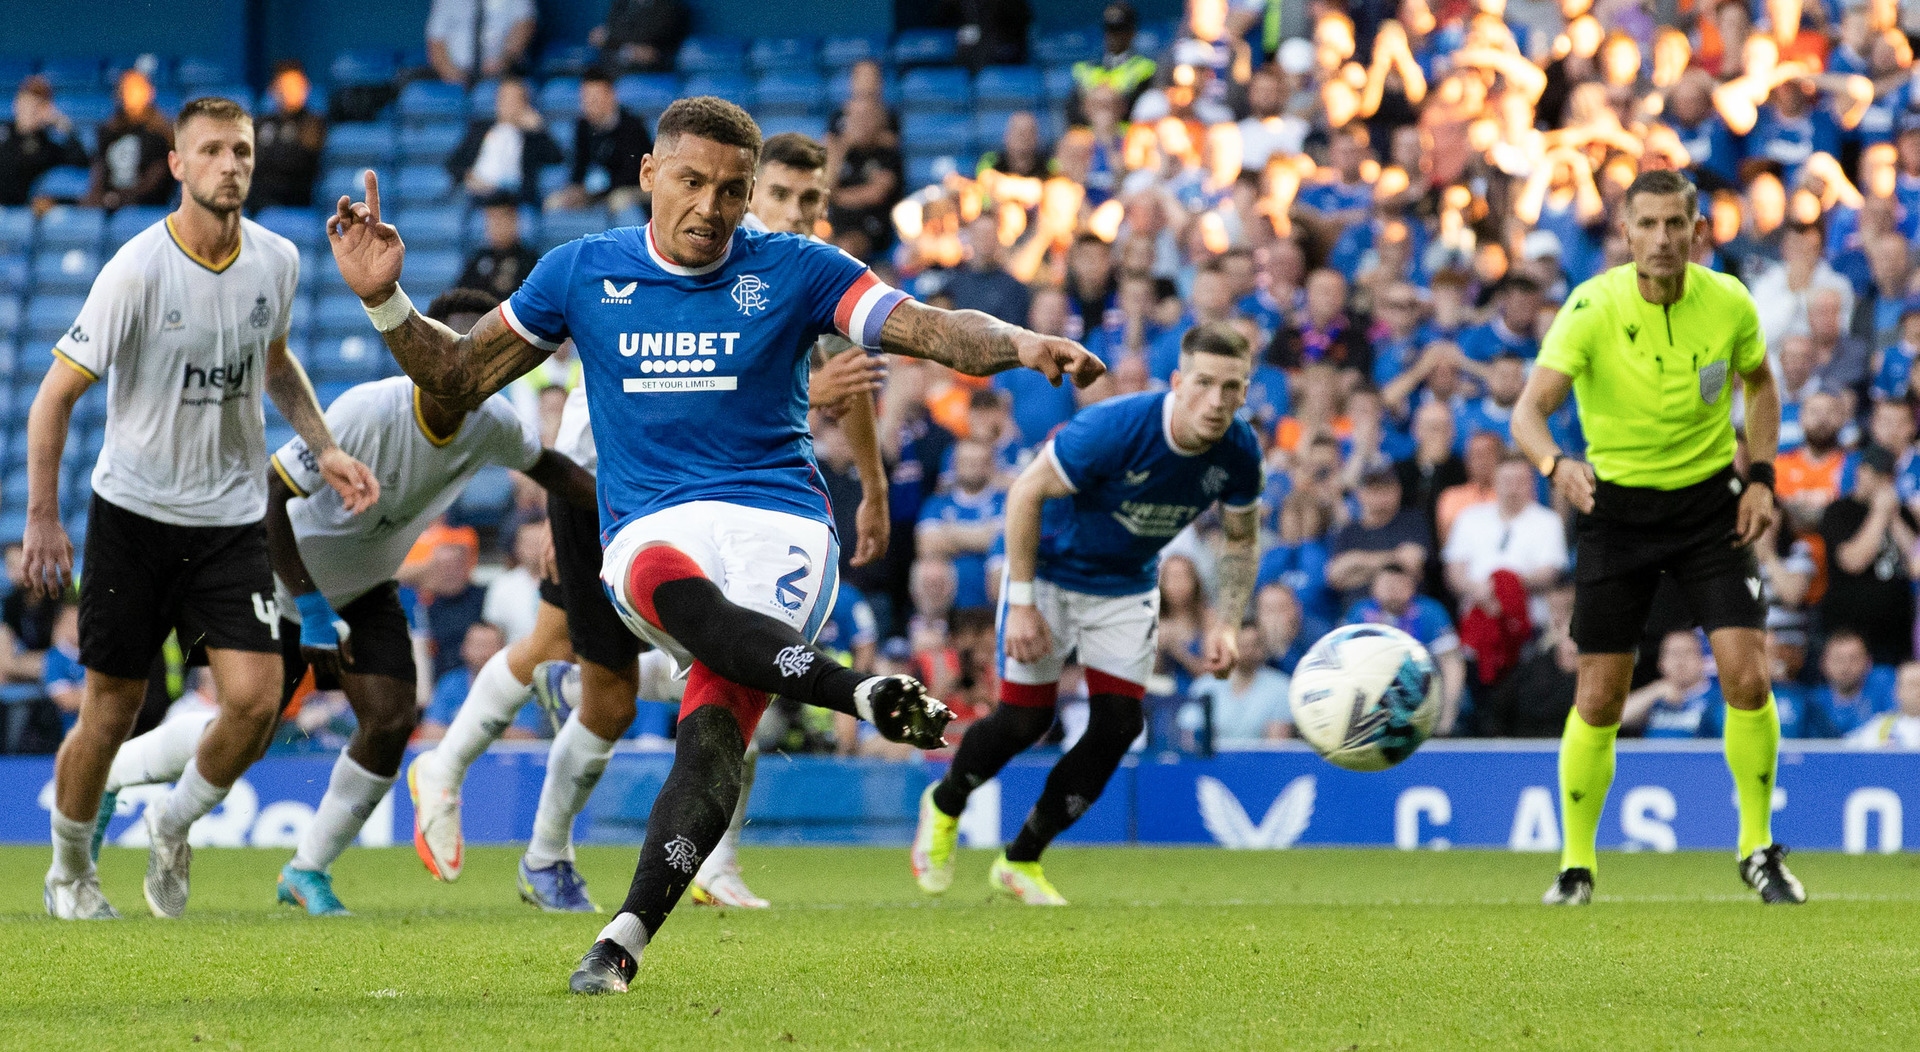 Captain reliable: Tavernier opened the scoring from the penalty spot.